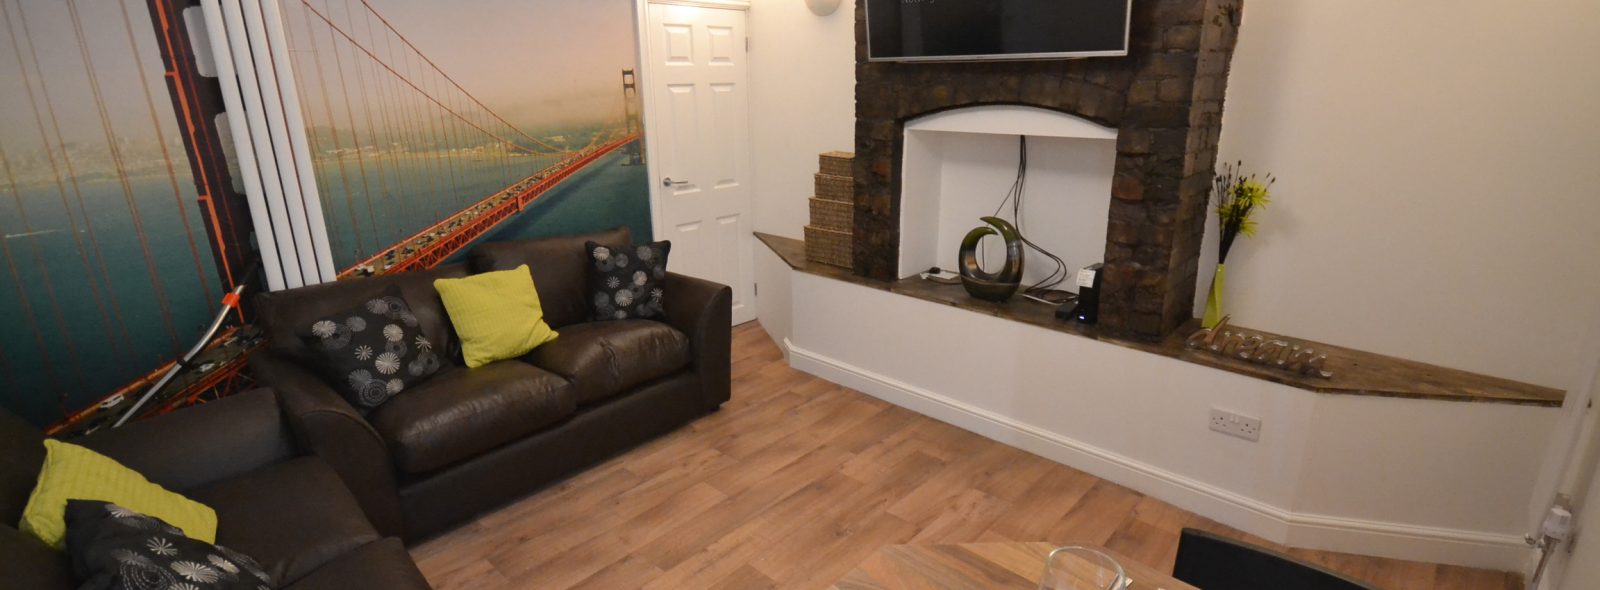 6-Bed Student House – Broadgate, Beeston